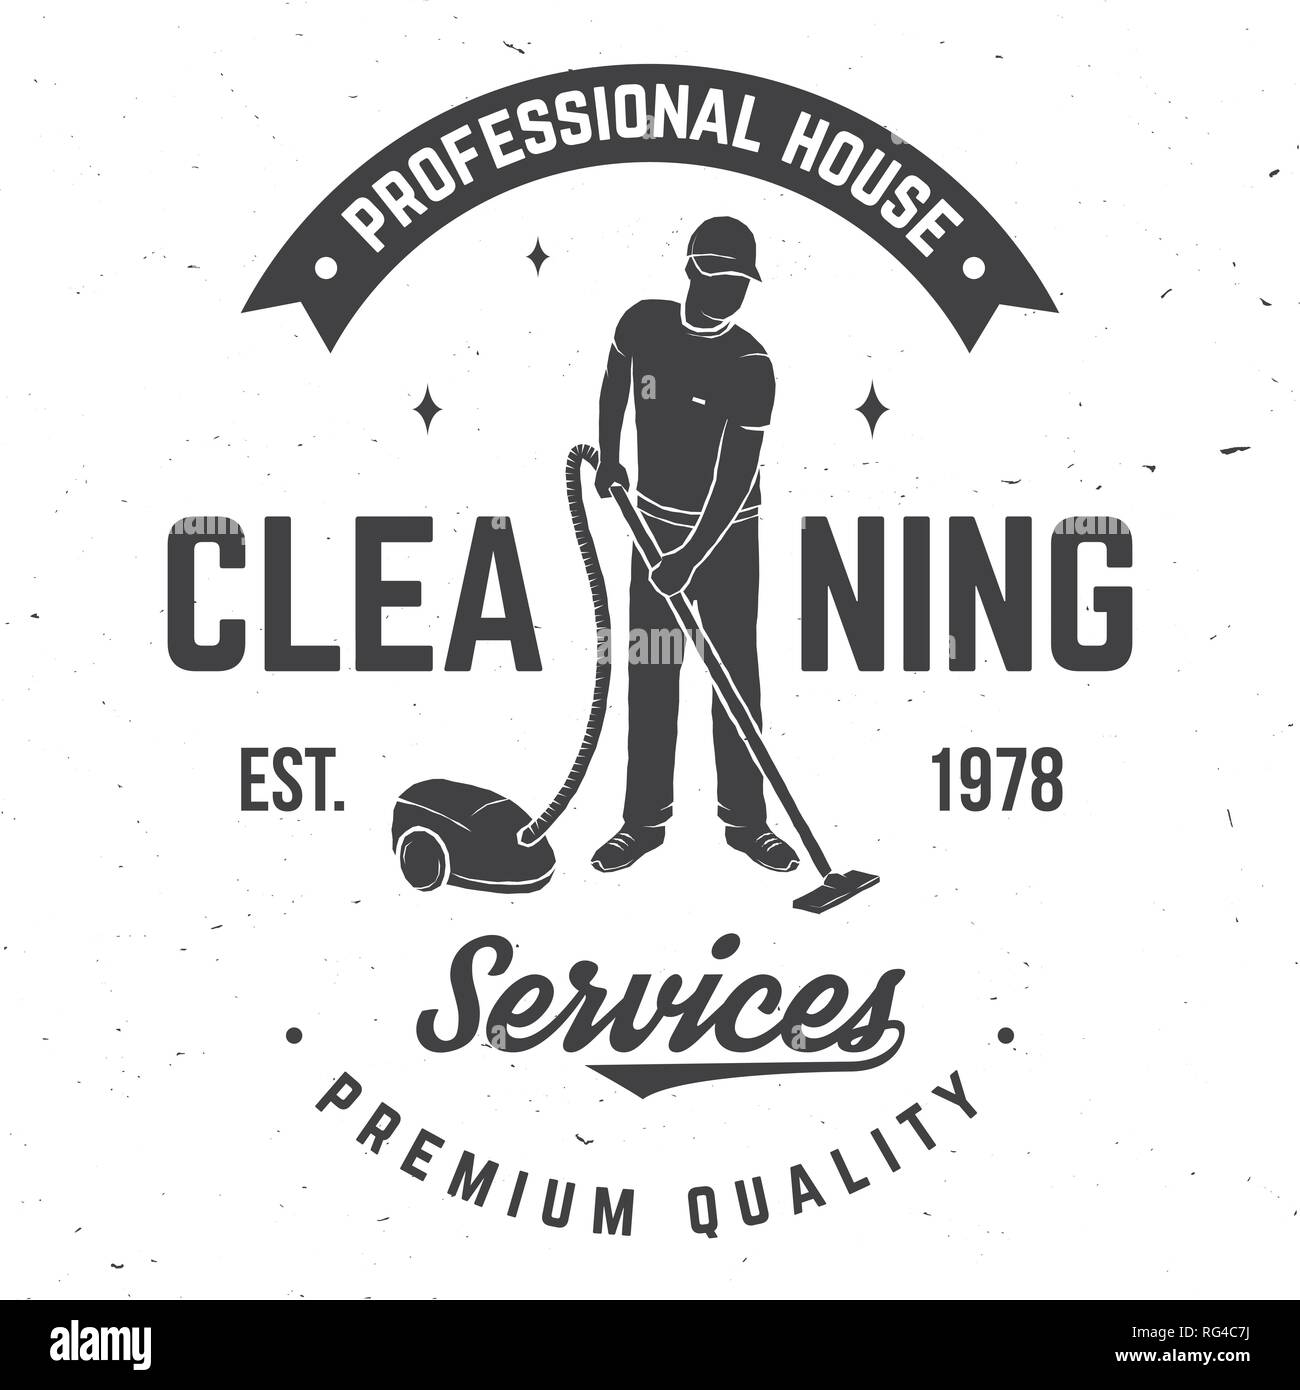 Cleaning company badge, emblem. Vector illustration. Concept for shirt, print, stamp or tee. Vintage typography design with man and Vacuum Cleaner. Cleaning service sign for company related business Stock Vector